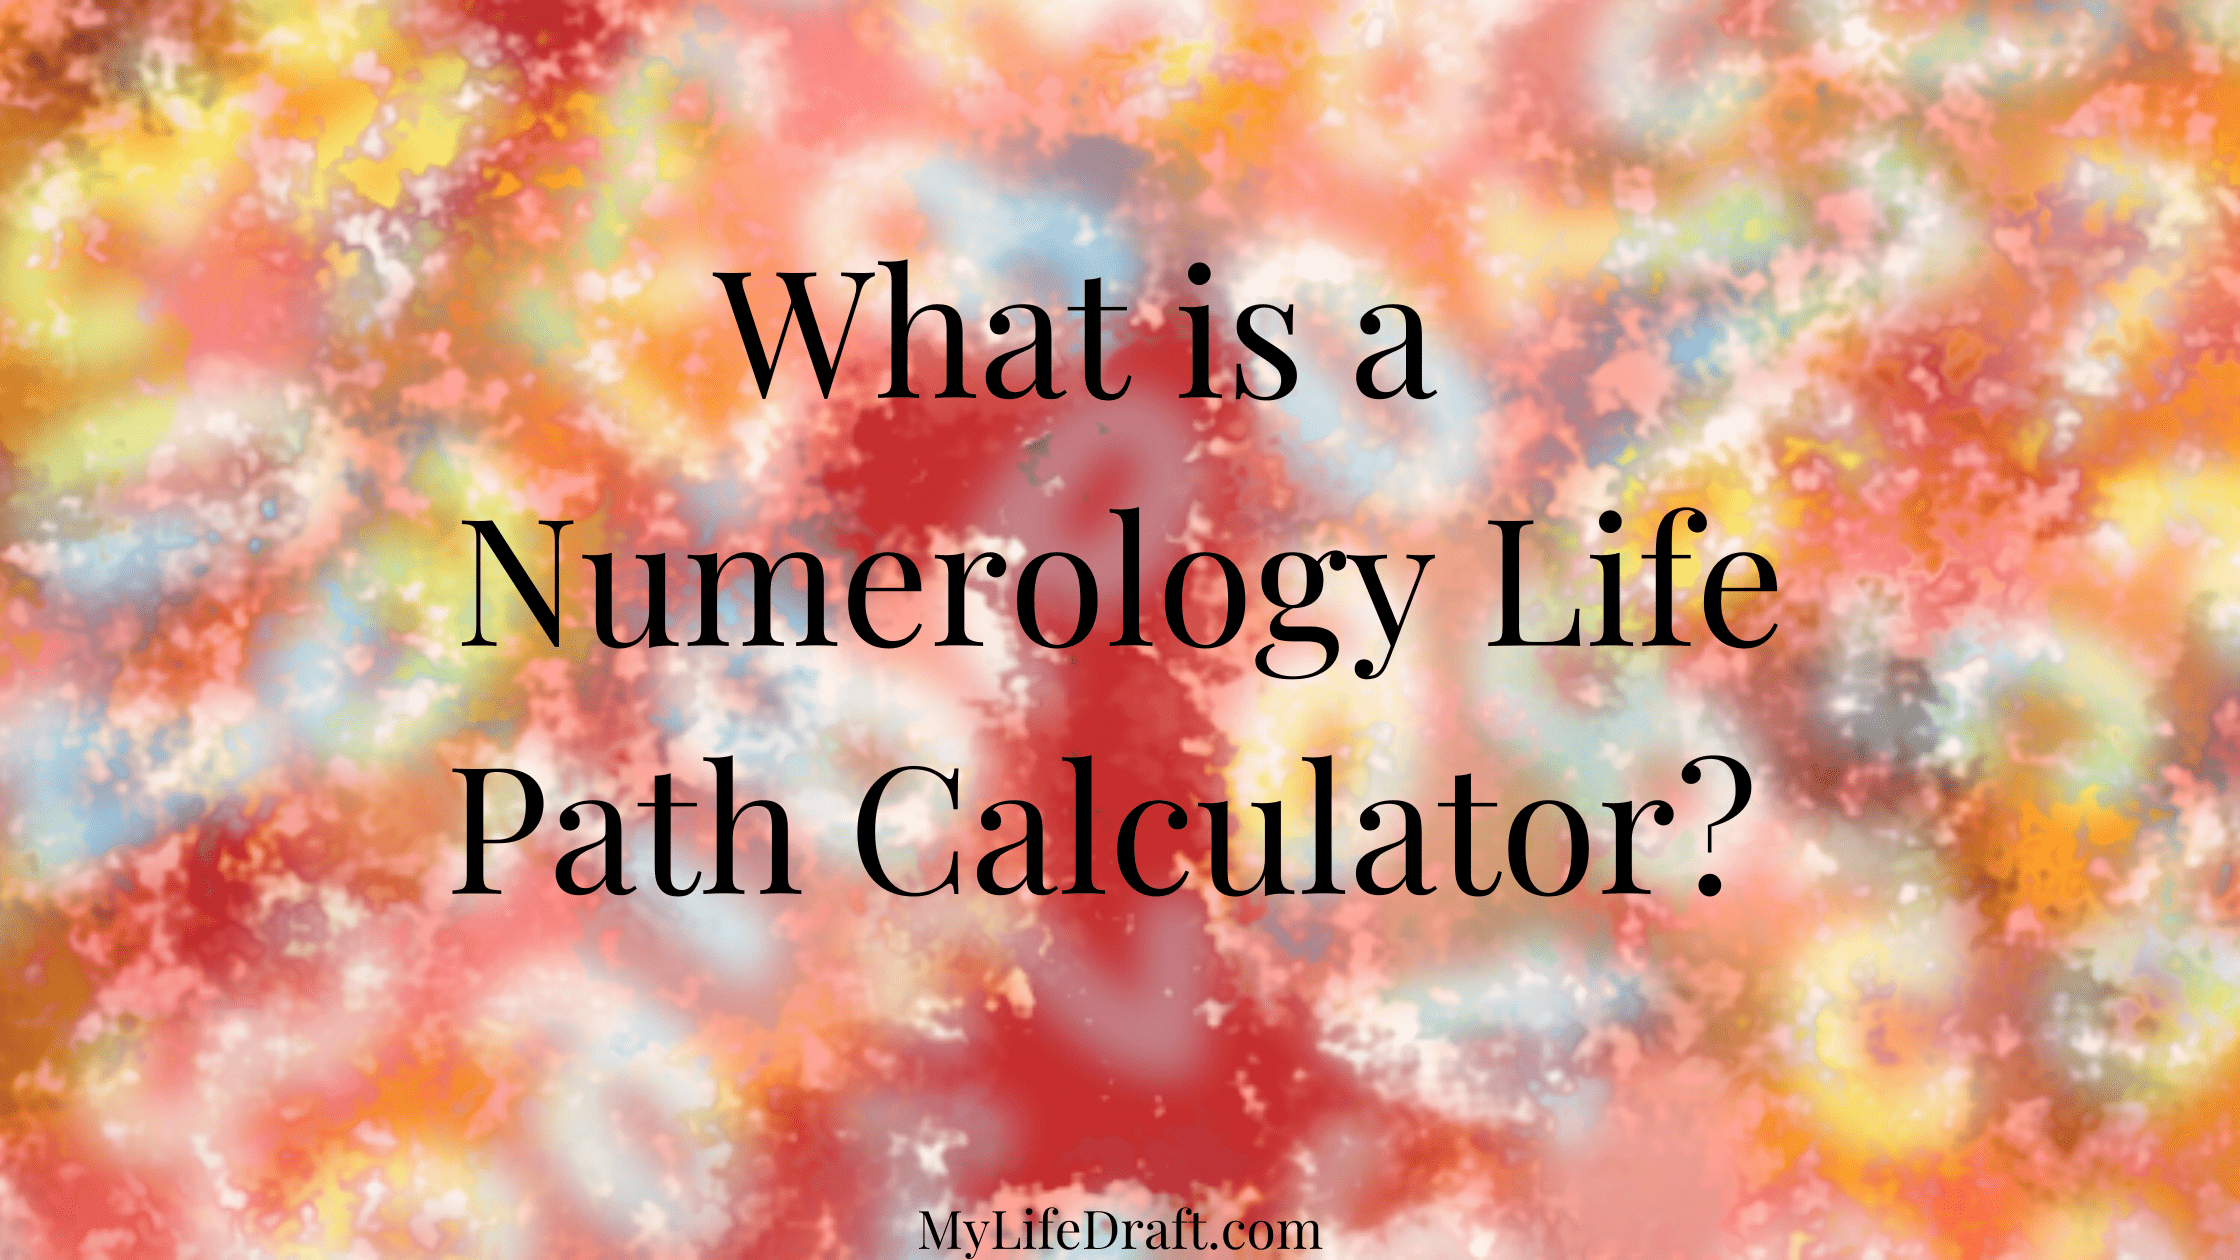 What is a Numerology Life Path Calculator